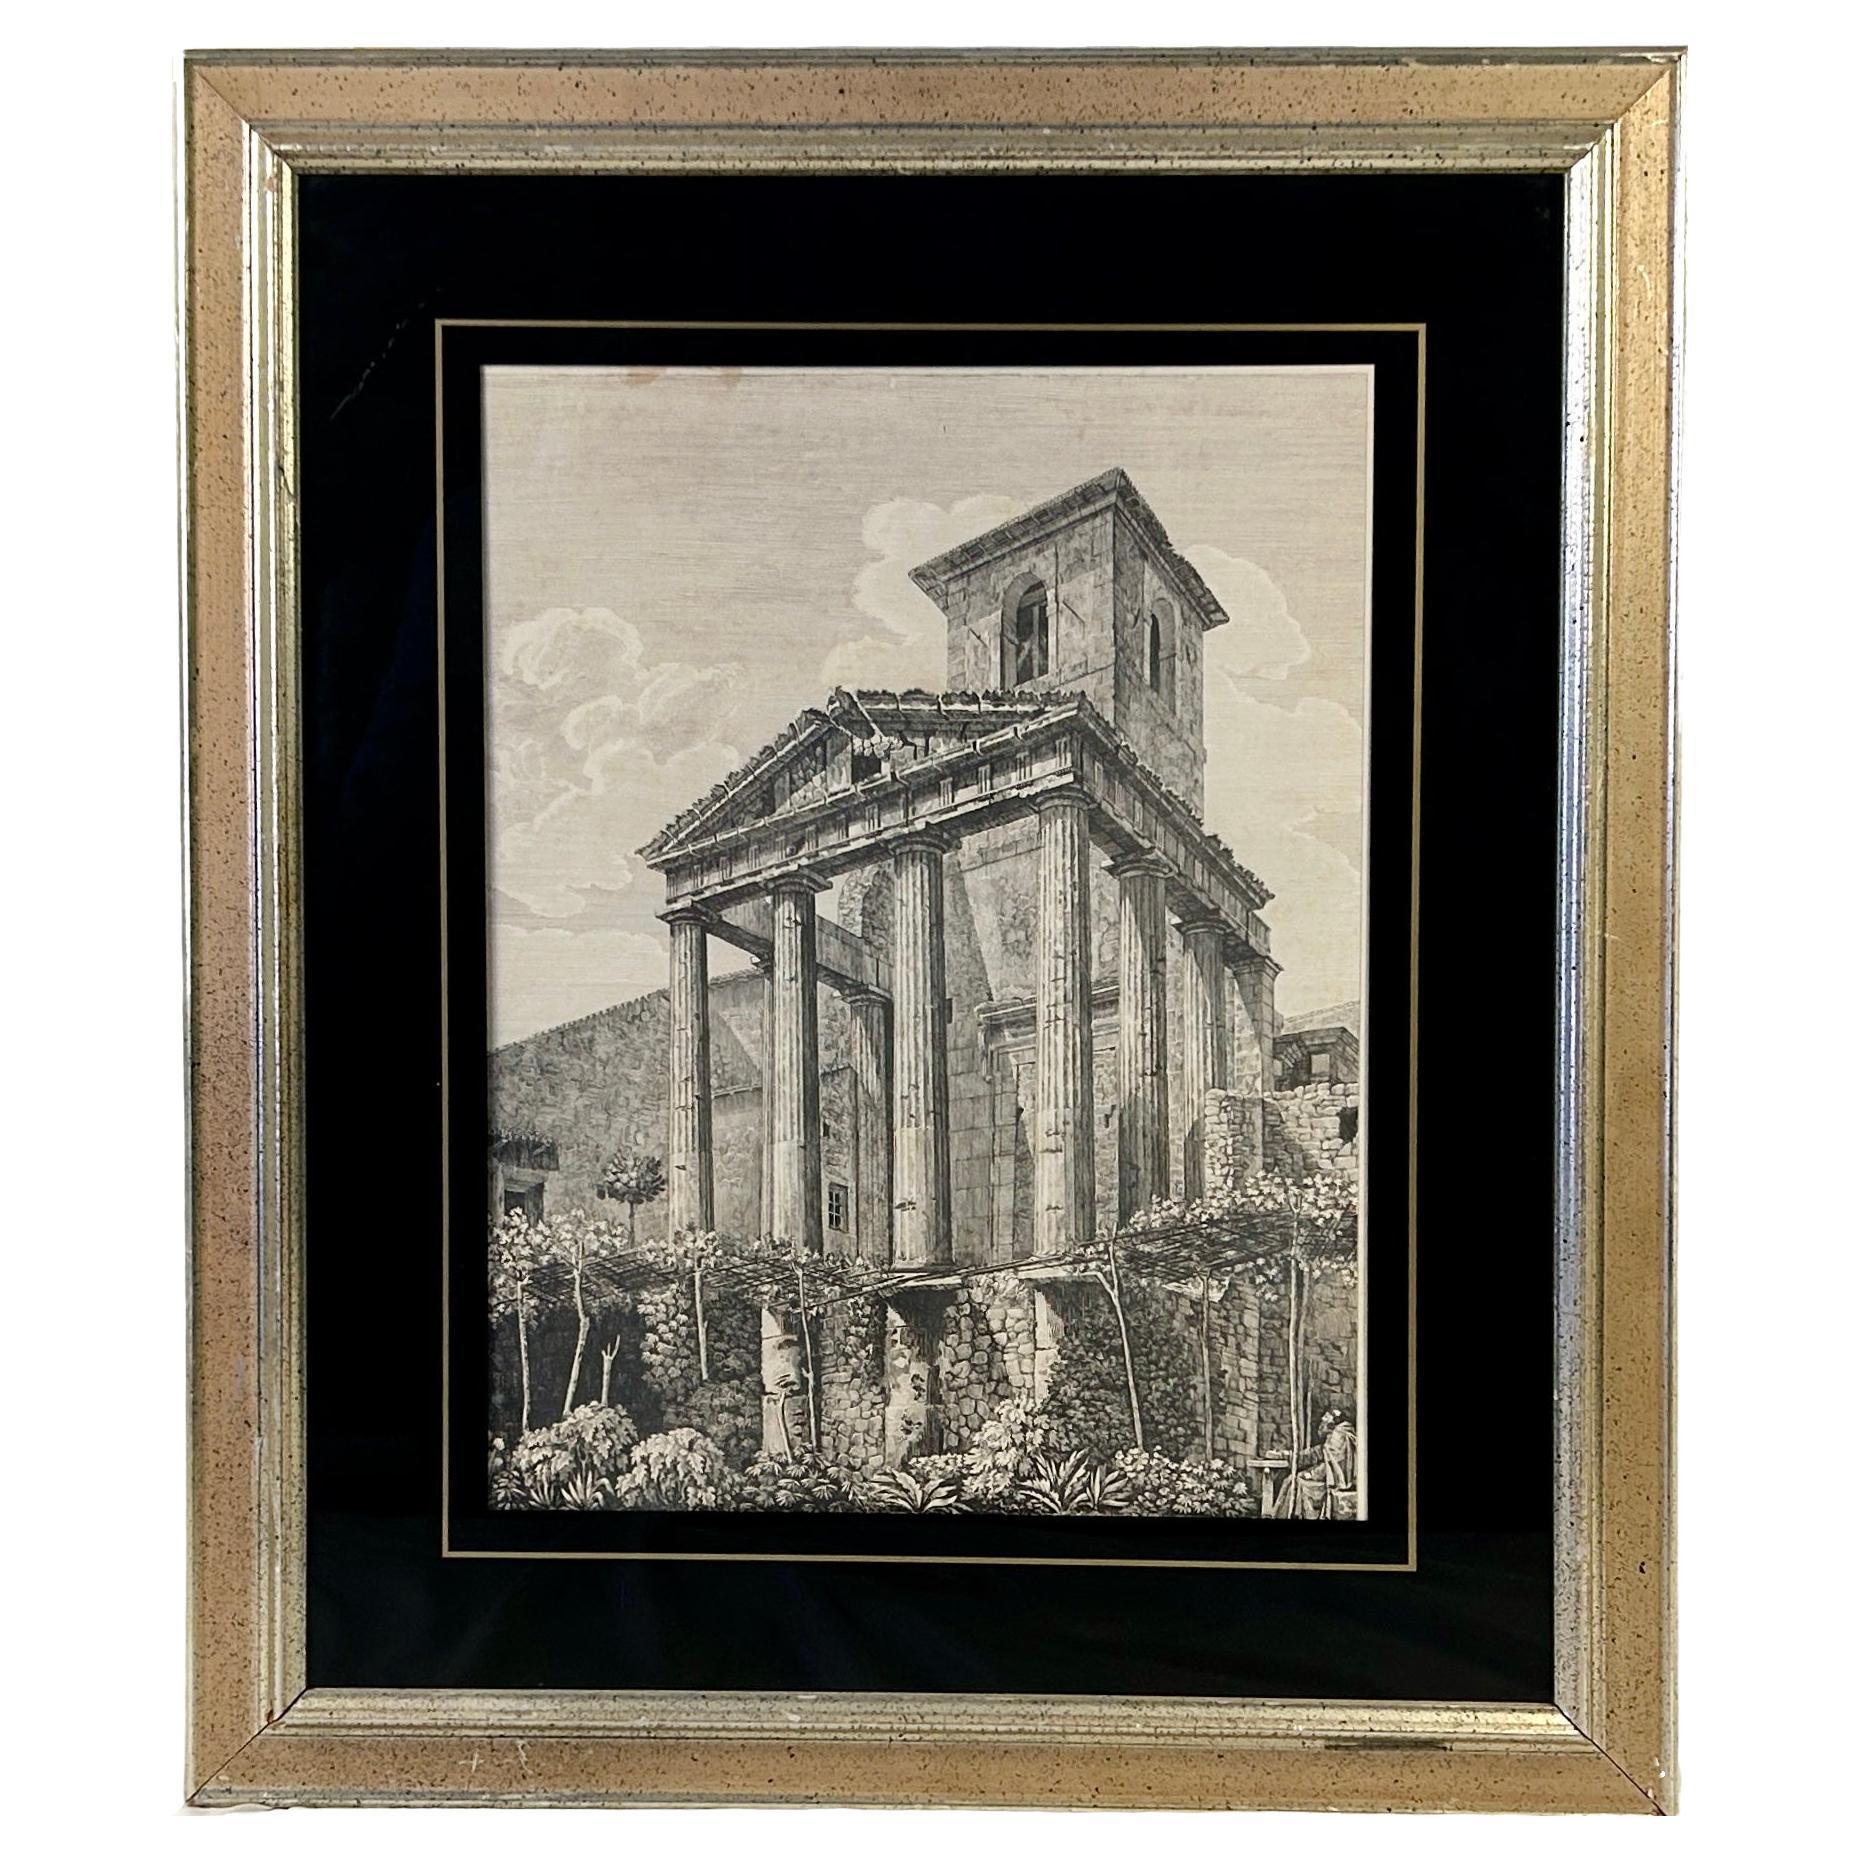 Giovanni Piranesi's "The Temple Of Hercules" Engraving, Framed